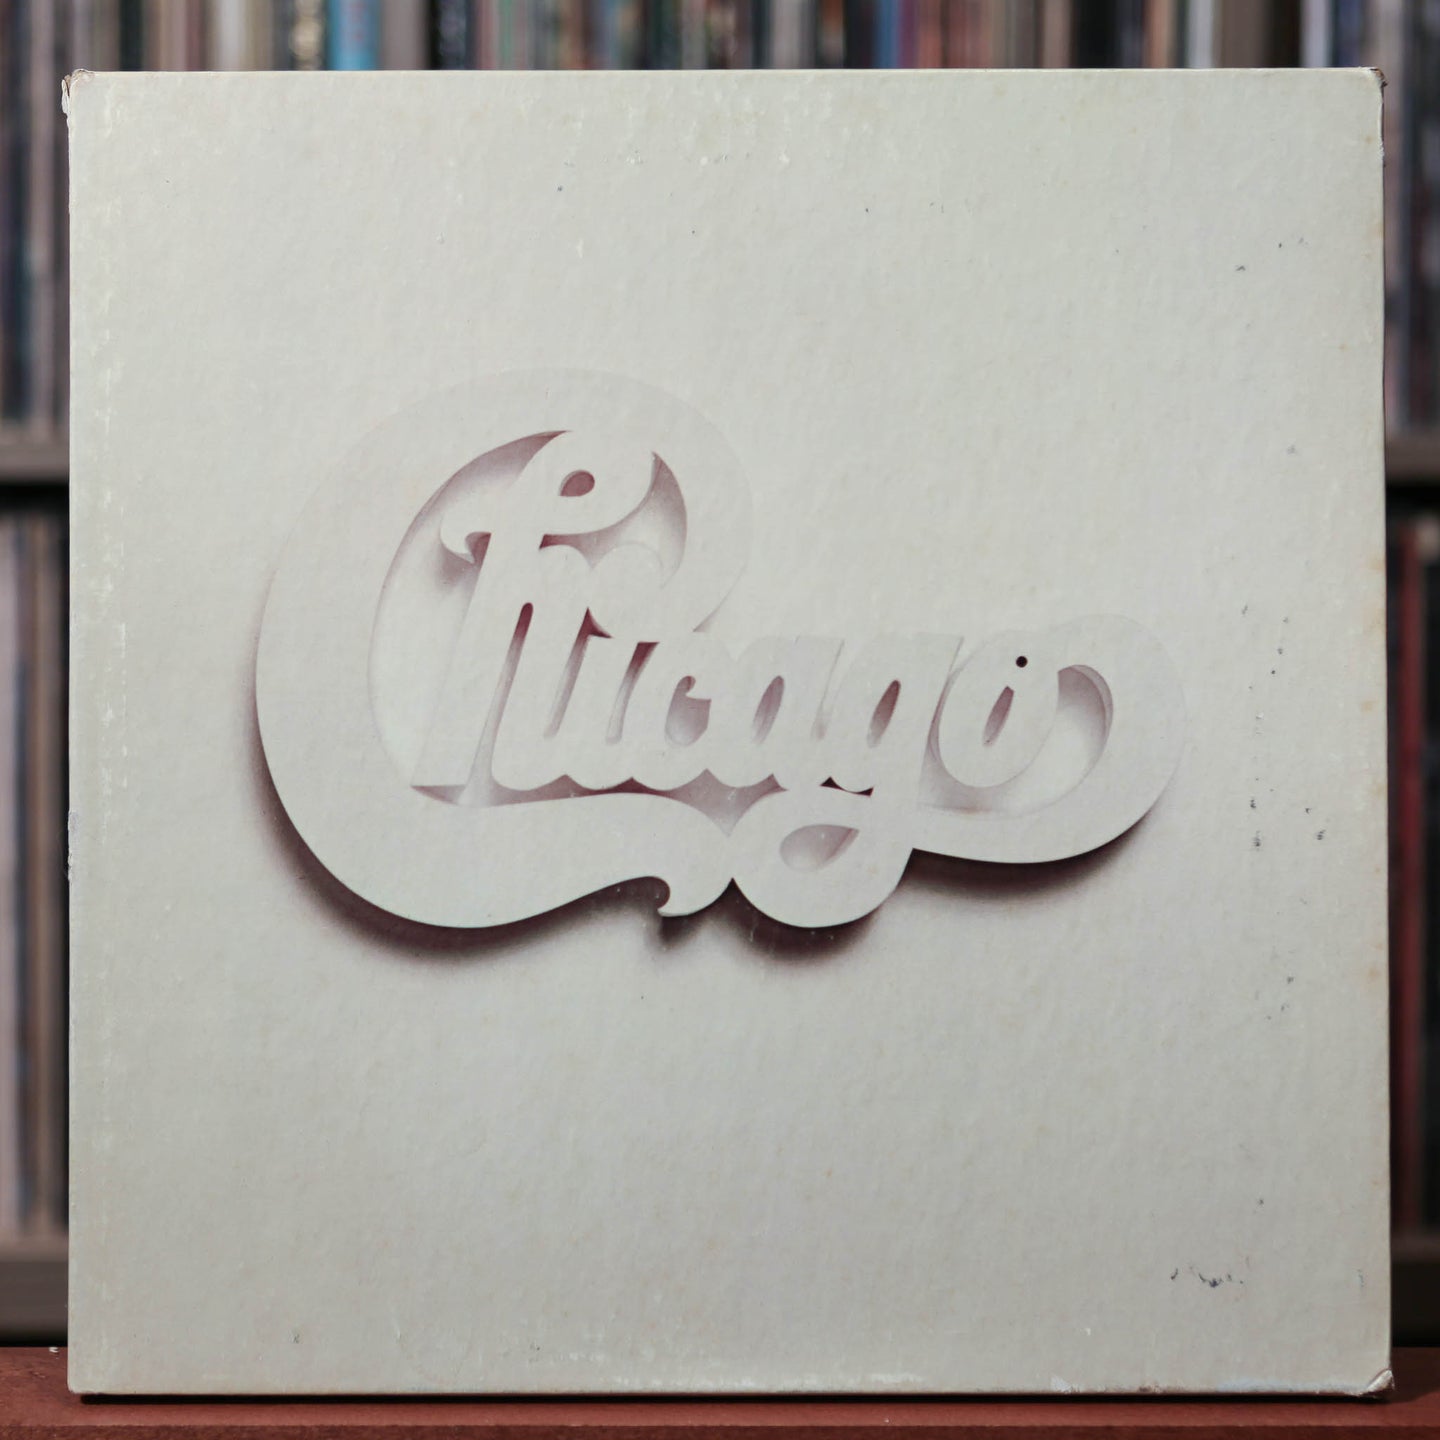 Chicago - At Carnegie Hall - 4LP Set - 1971 Columbia, VG/VG w/Poster